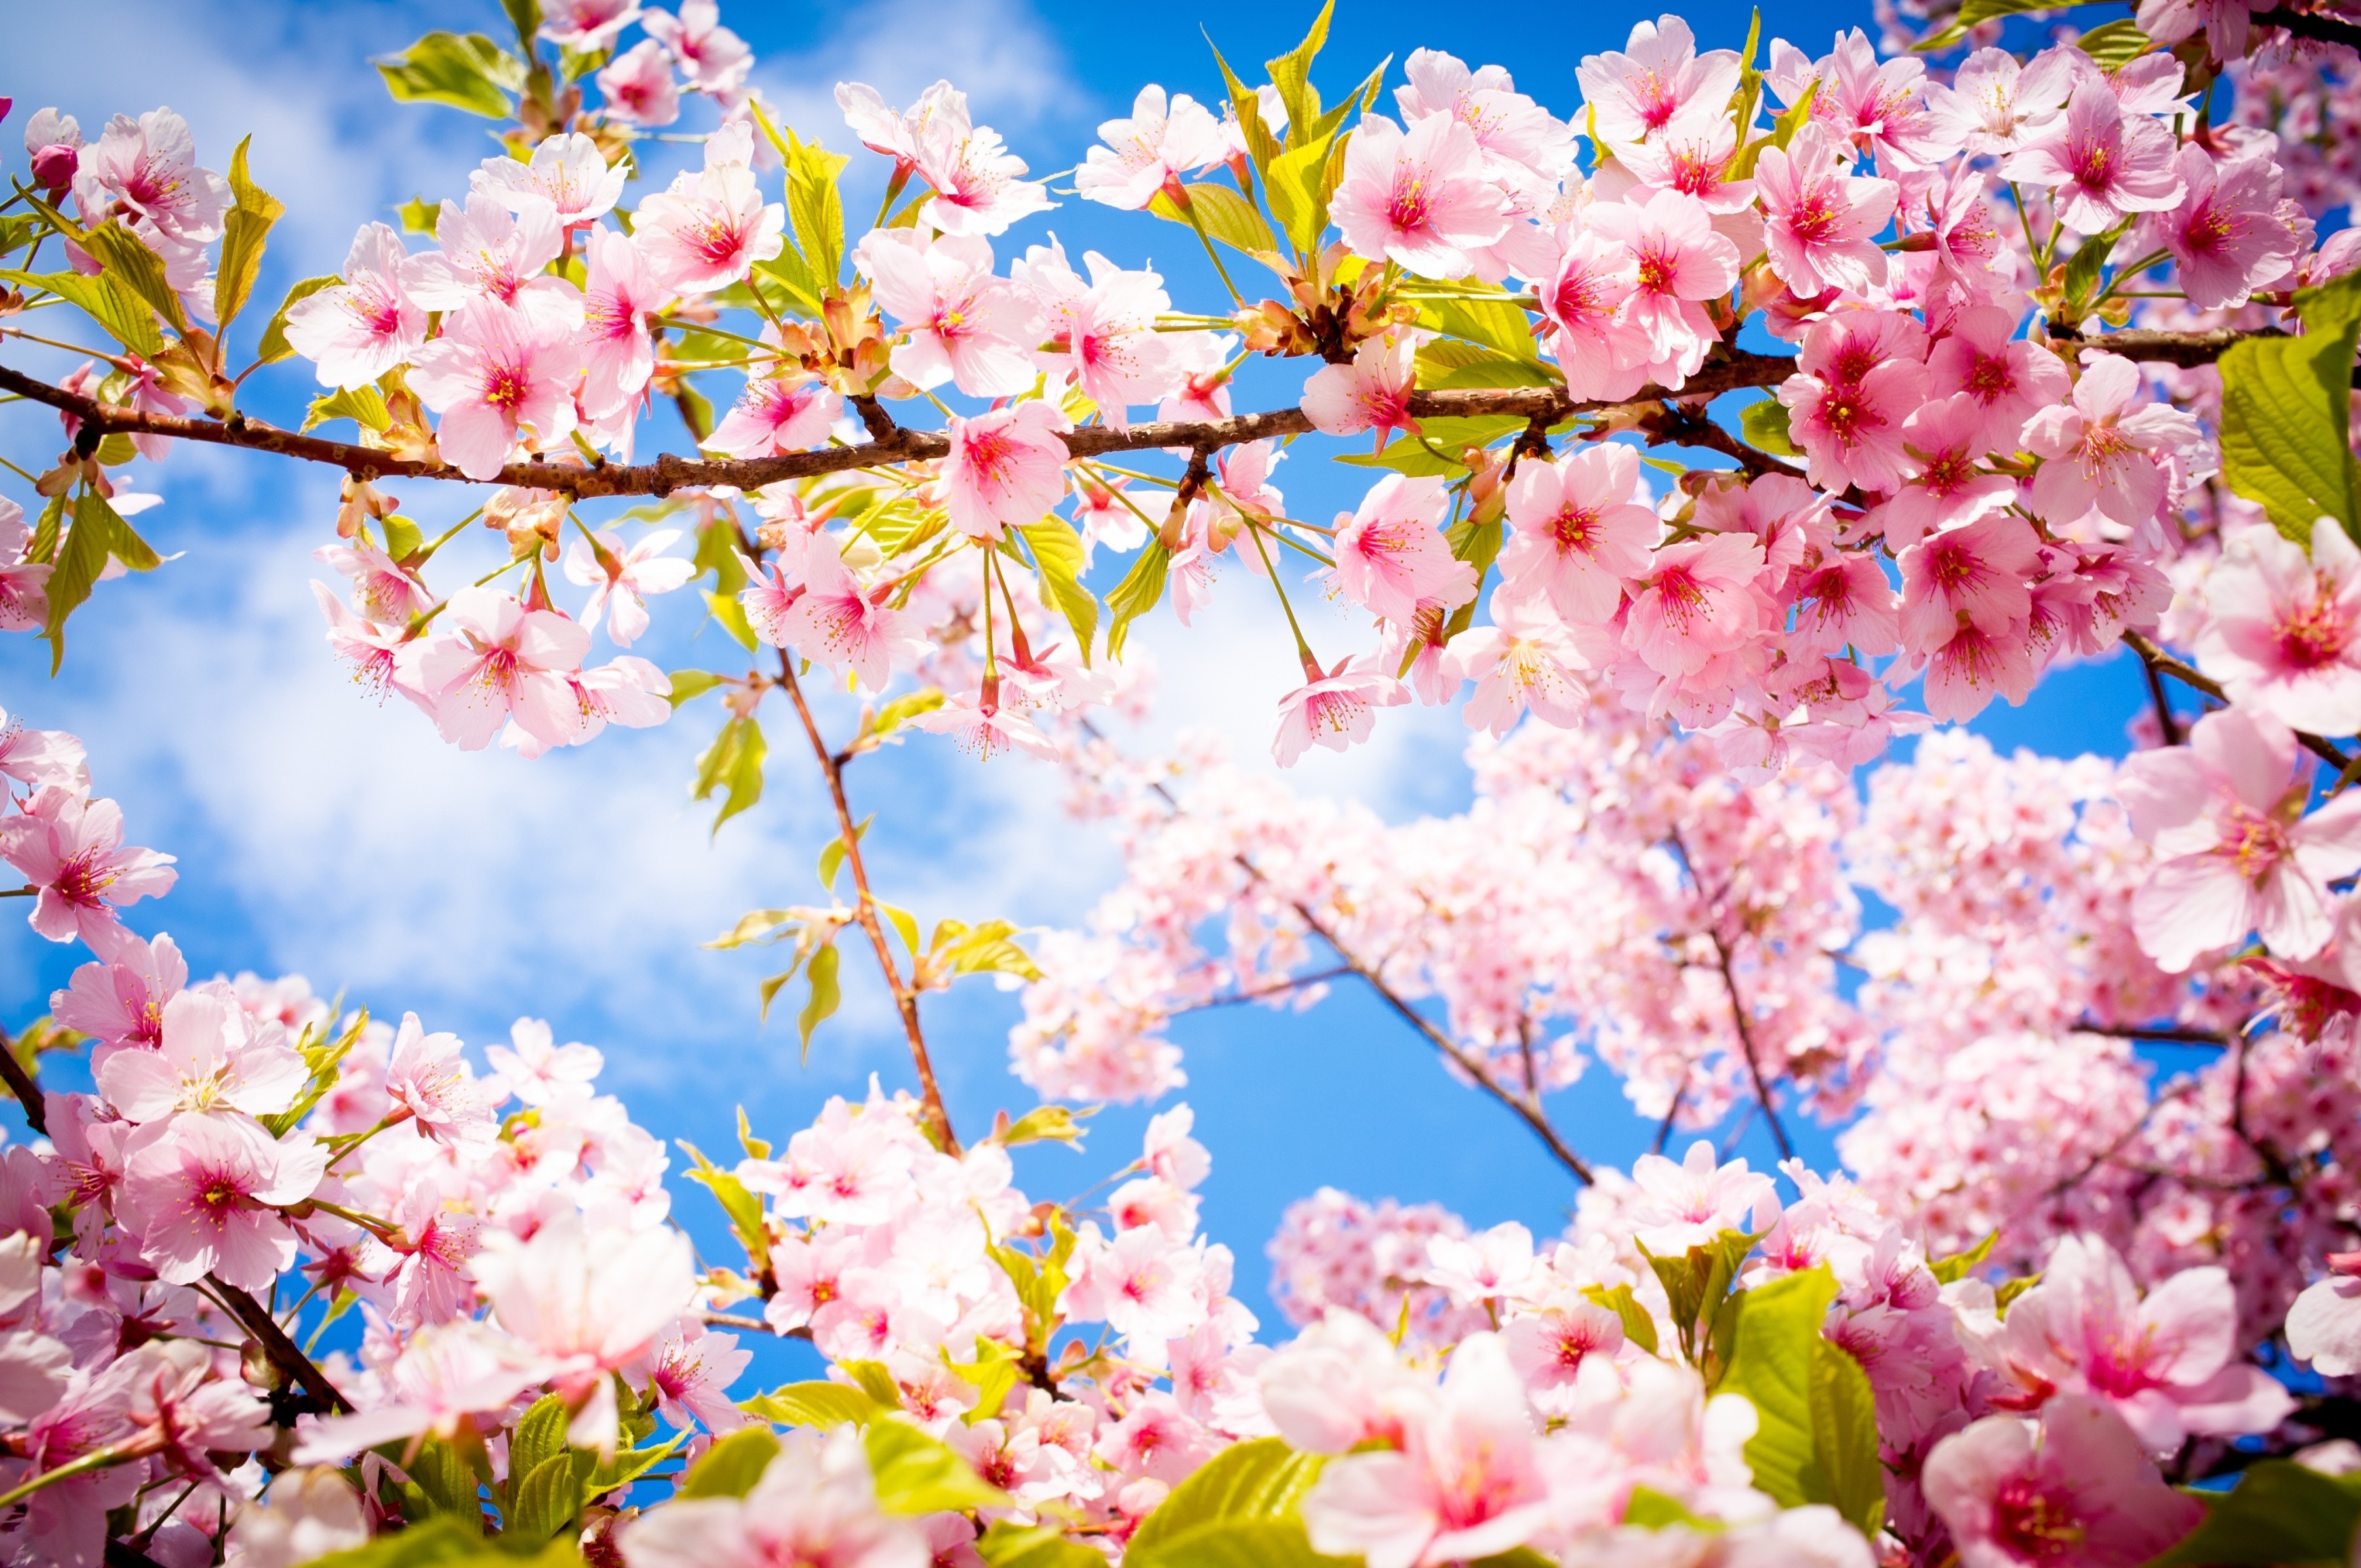 General 3600x2391 photography flowers cherry blossom plants